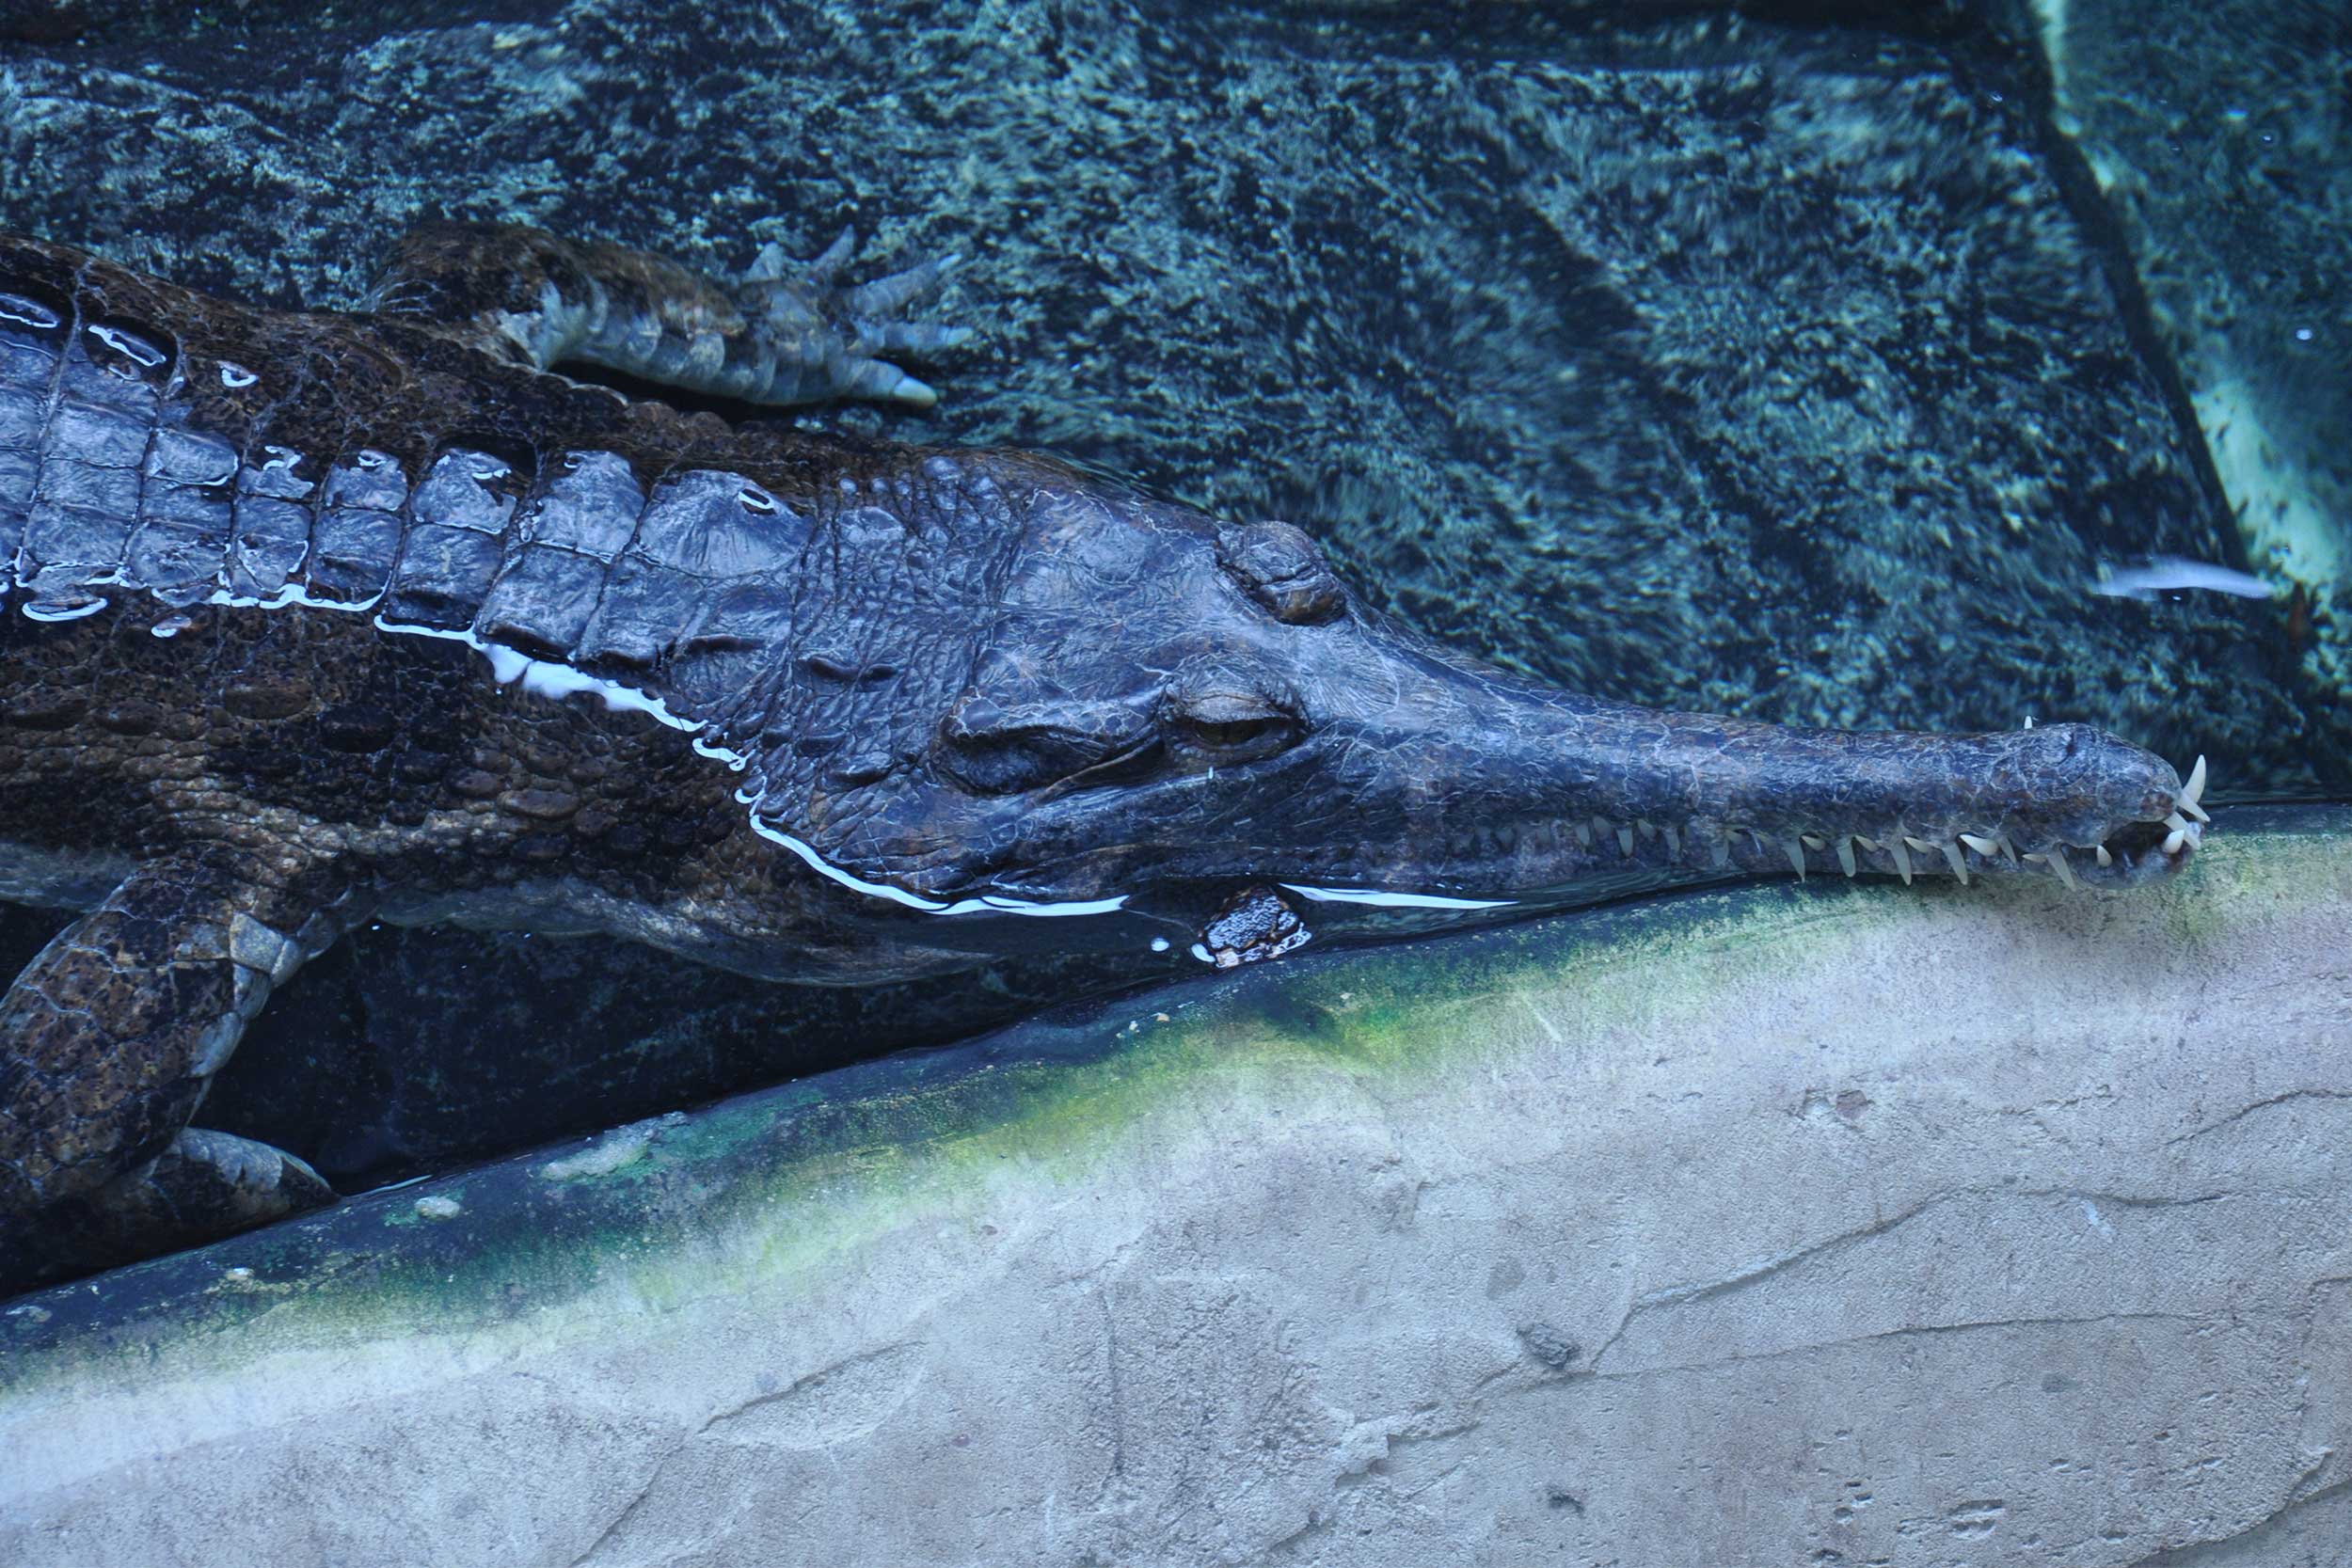 False Gharial (Tomistoma schlegelii) taken at Crocodiles of the World